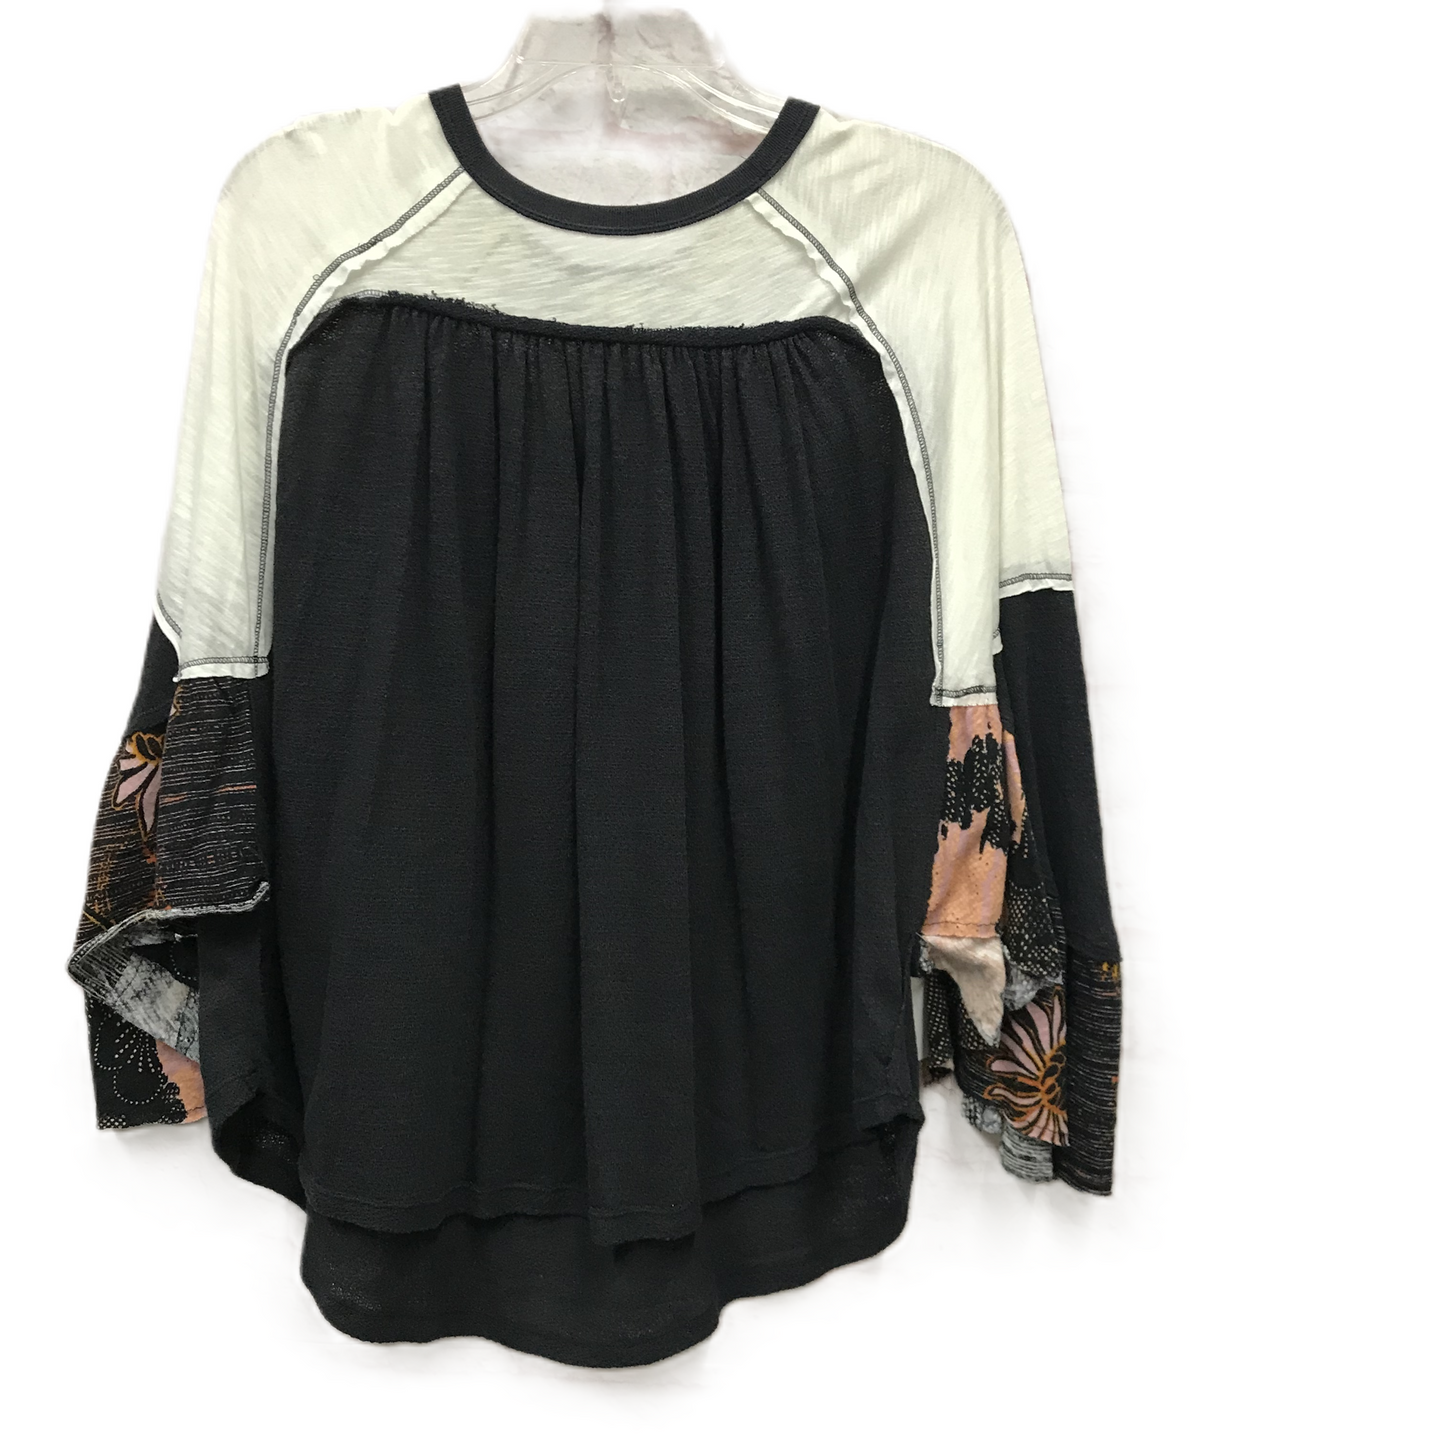 Black Top Long Sleeve By We The Free, Size: S